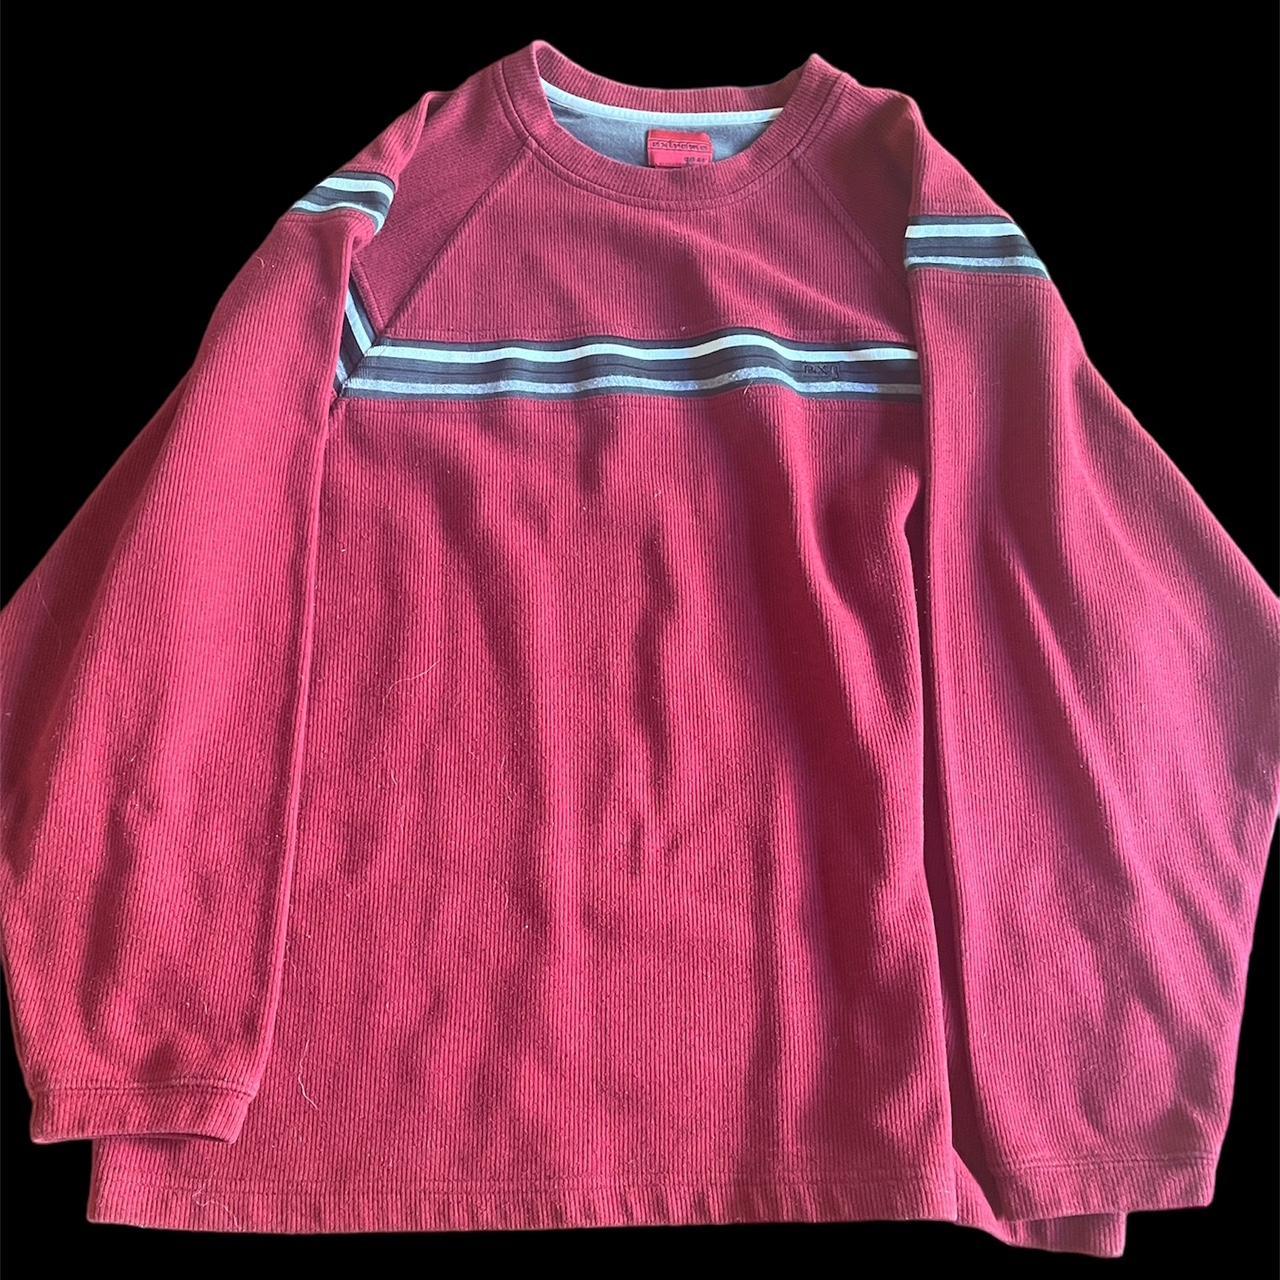 Extreme Fit Men's Red and Burgundy Jumper